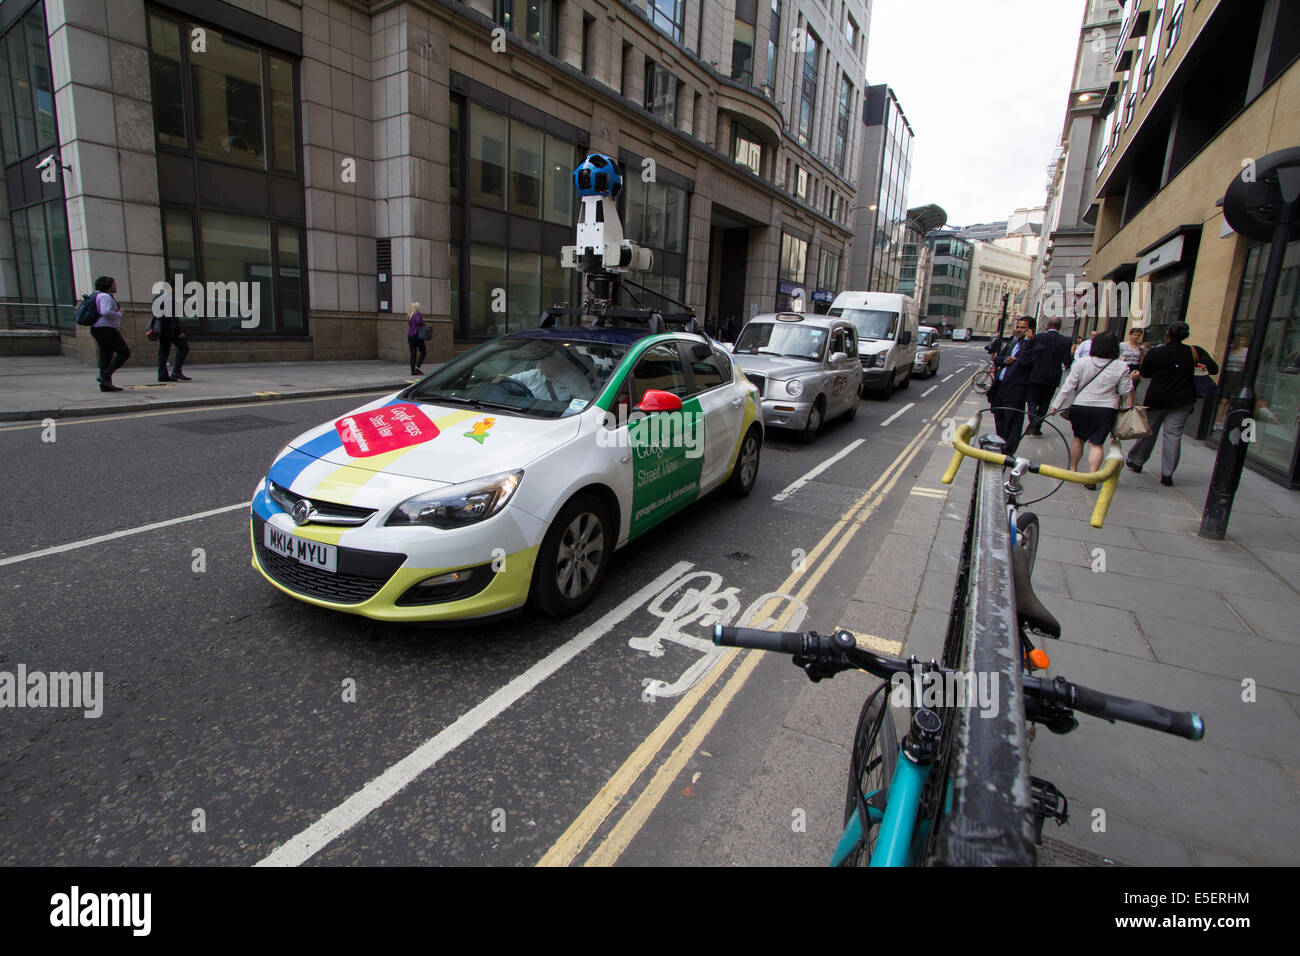 Google Street View Car with camera on roof of vehicle in Central London Stock Photo